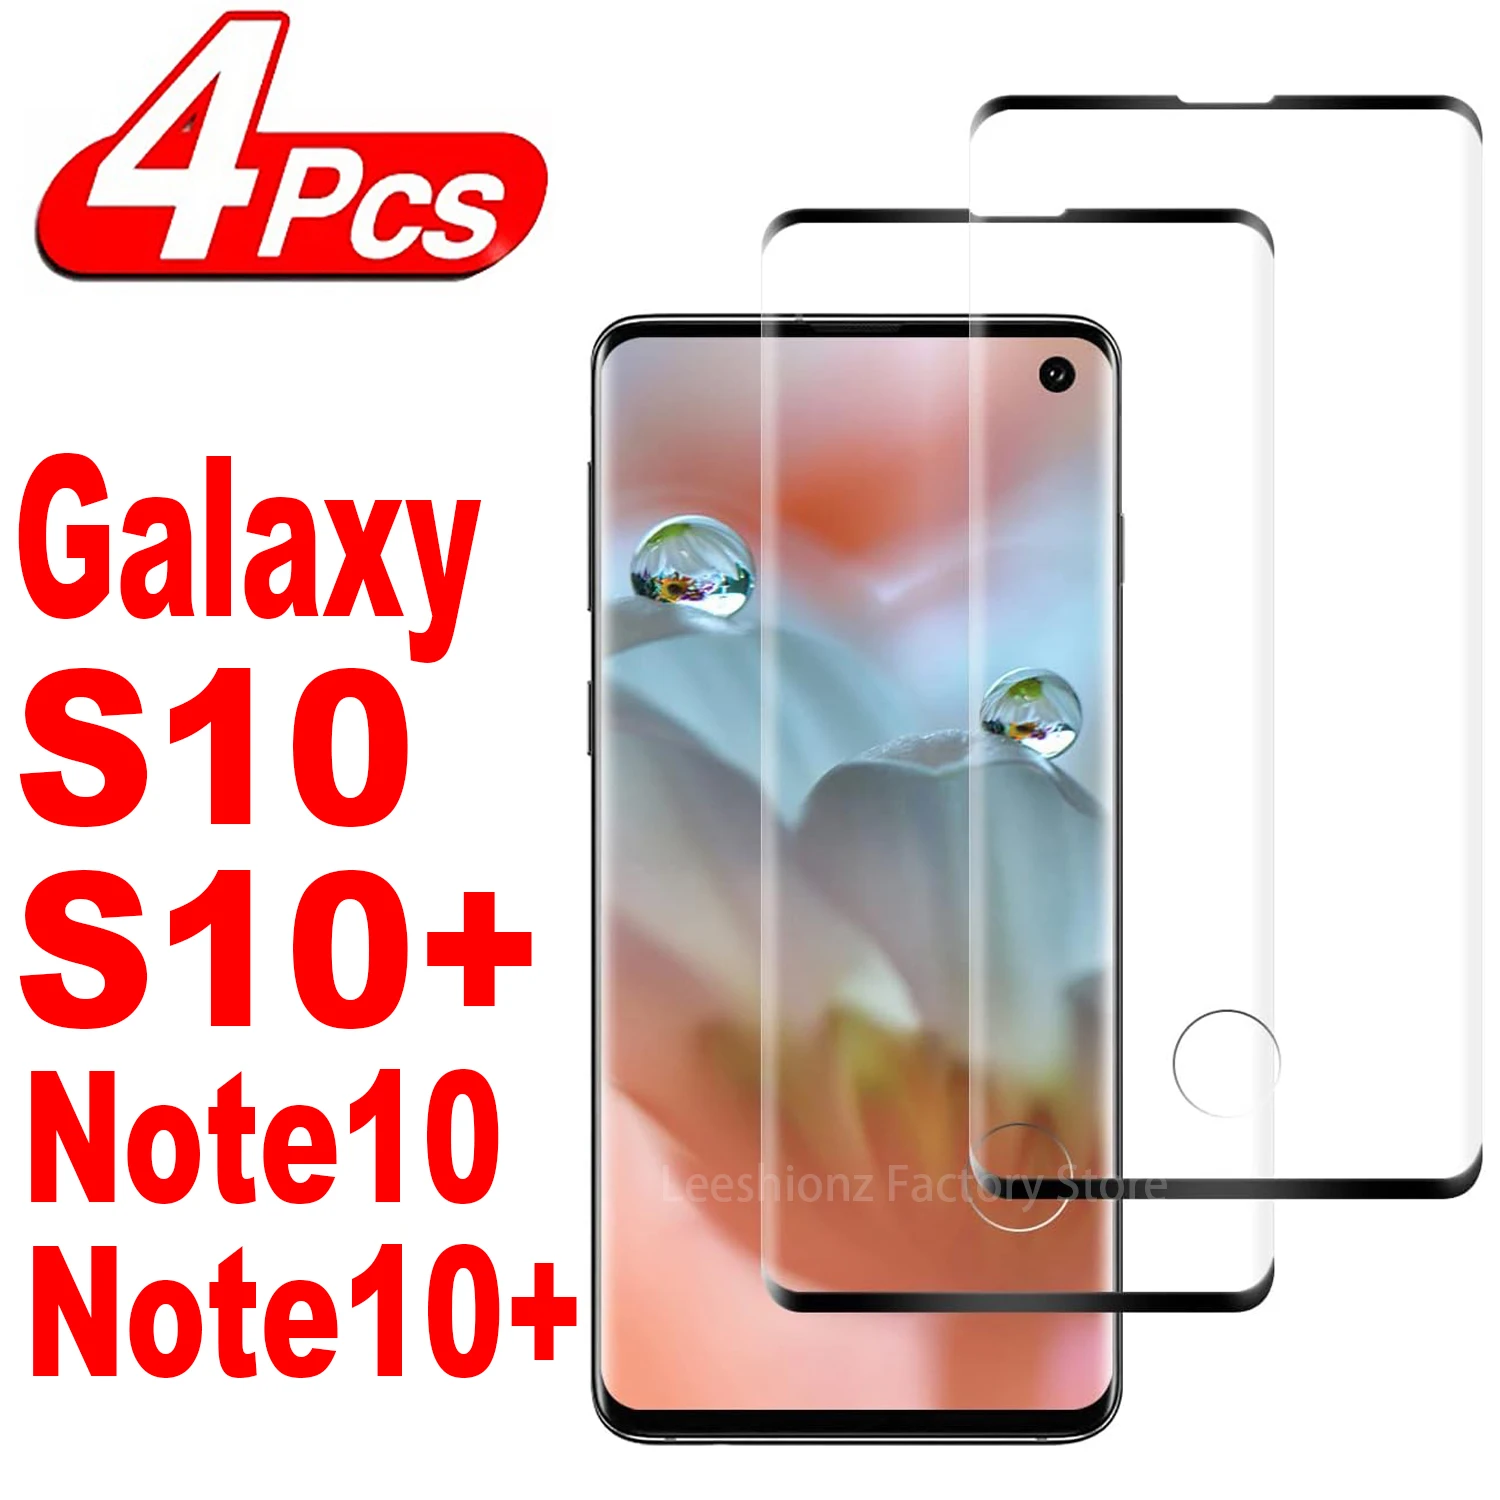 tempered glass for samsung note 10 lite glass screen protector for samsung s20 fe s10 s10e s 10 lit note10 light protective film 1/4Pcs 3D Screen Protector Glass For Samsung Galaxy S10 S10+ Note 10 Plus Note10+ Tempered Glass Film